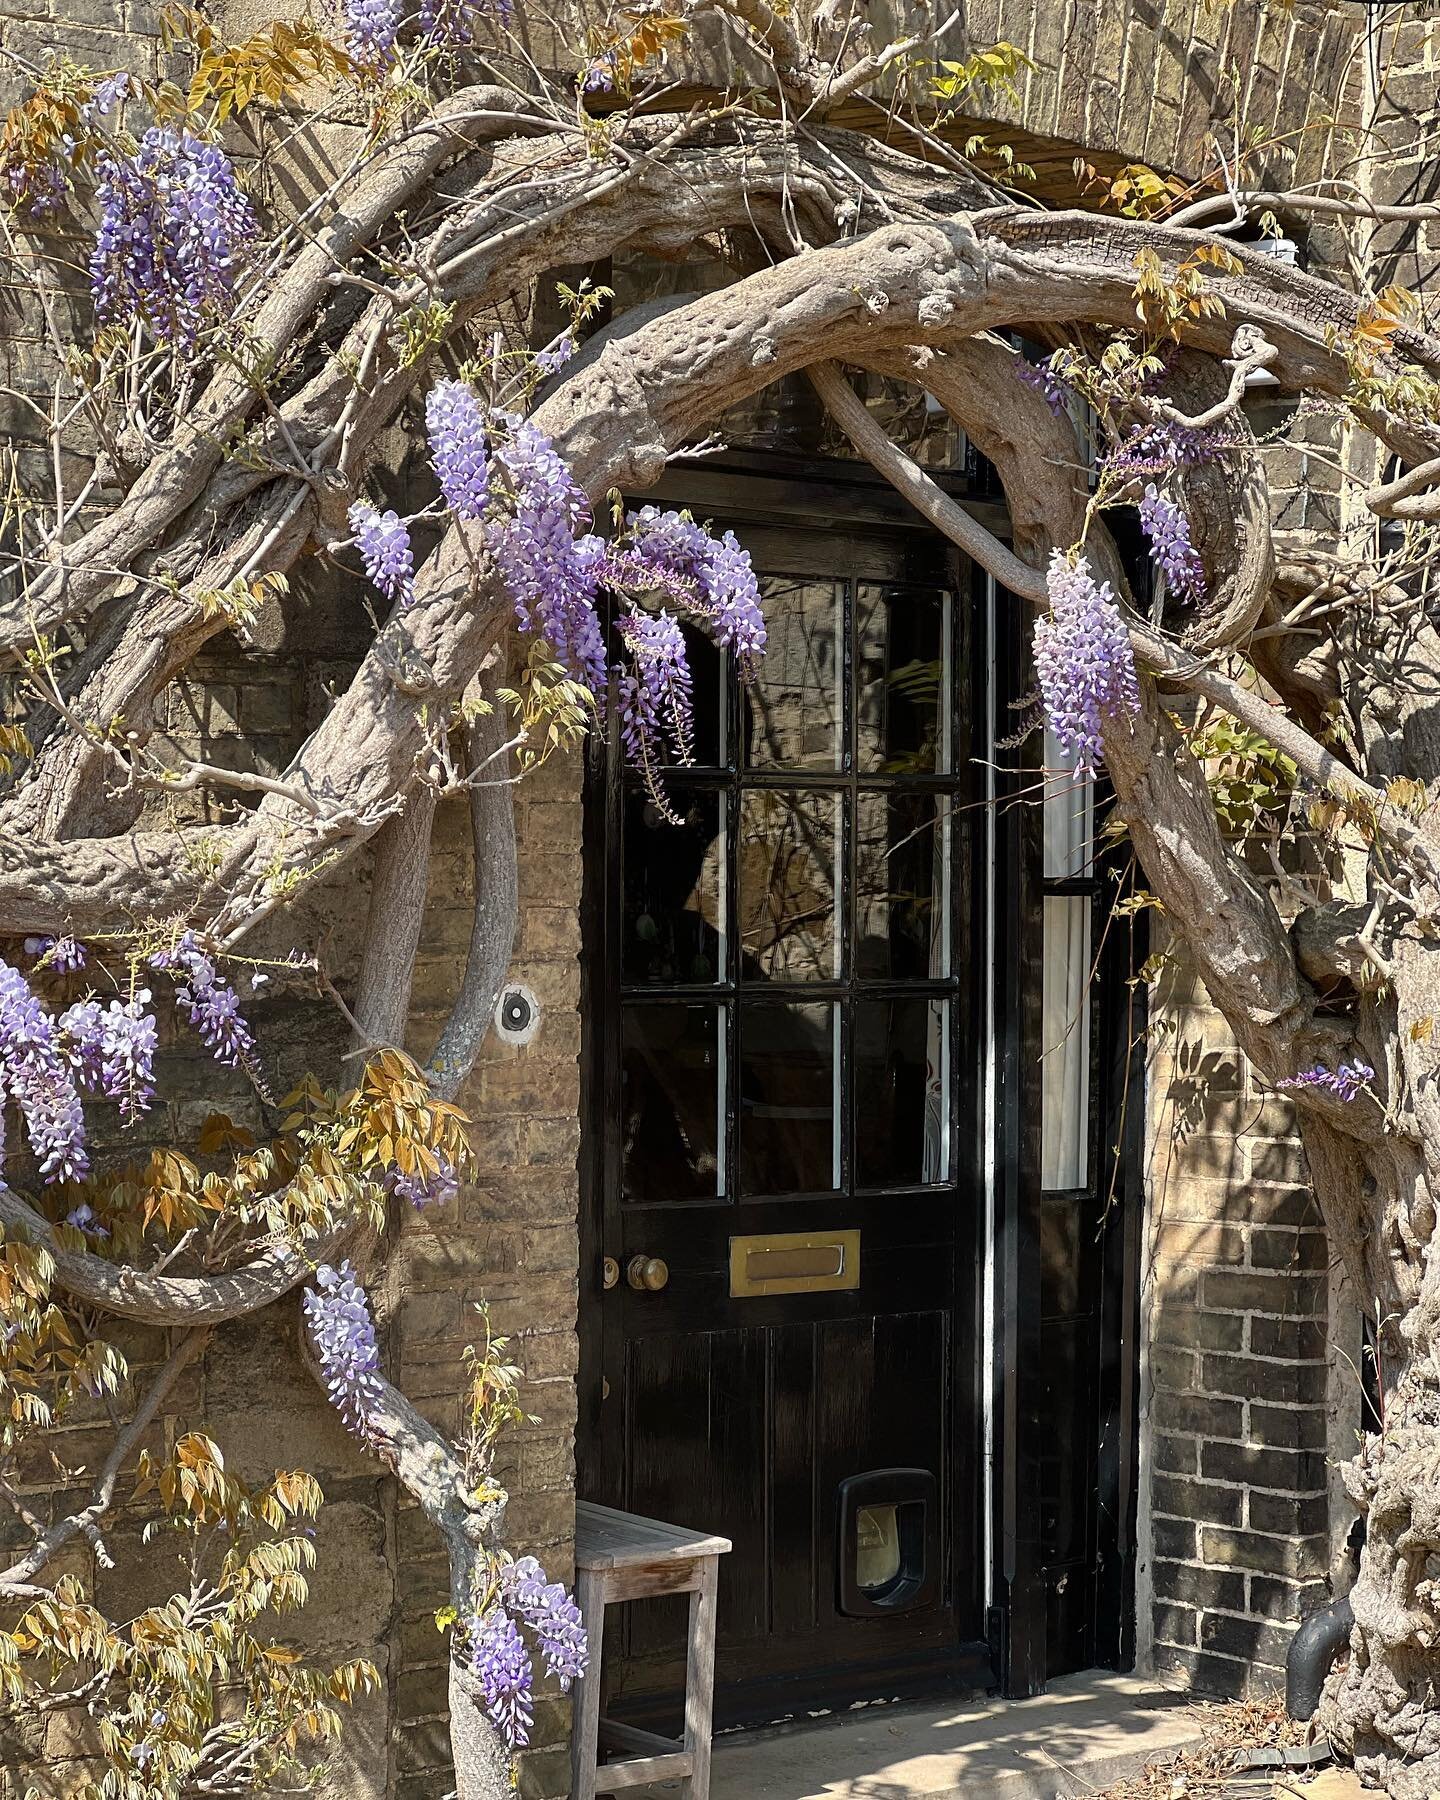 250 year old wisteria - apparently still recovering after a major prune last year
.
.
#wisteria 
#wisteriahysteria 
#wisteriaflowers 
#springflowers 
#purpleflowers 
#climber 
#climbingplants 
#climbingplant 
#ancienttrees 
#ancient 
#historical 
#hi